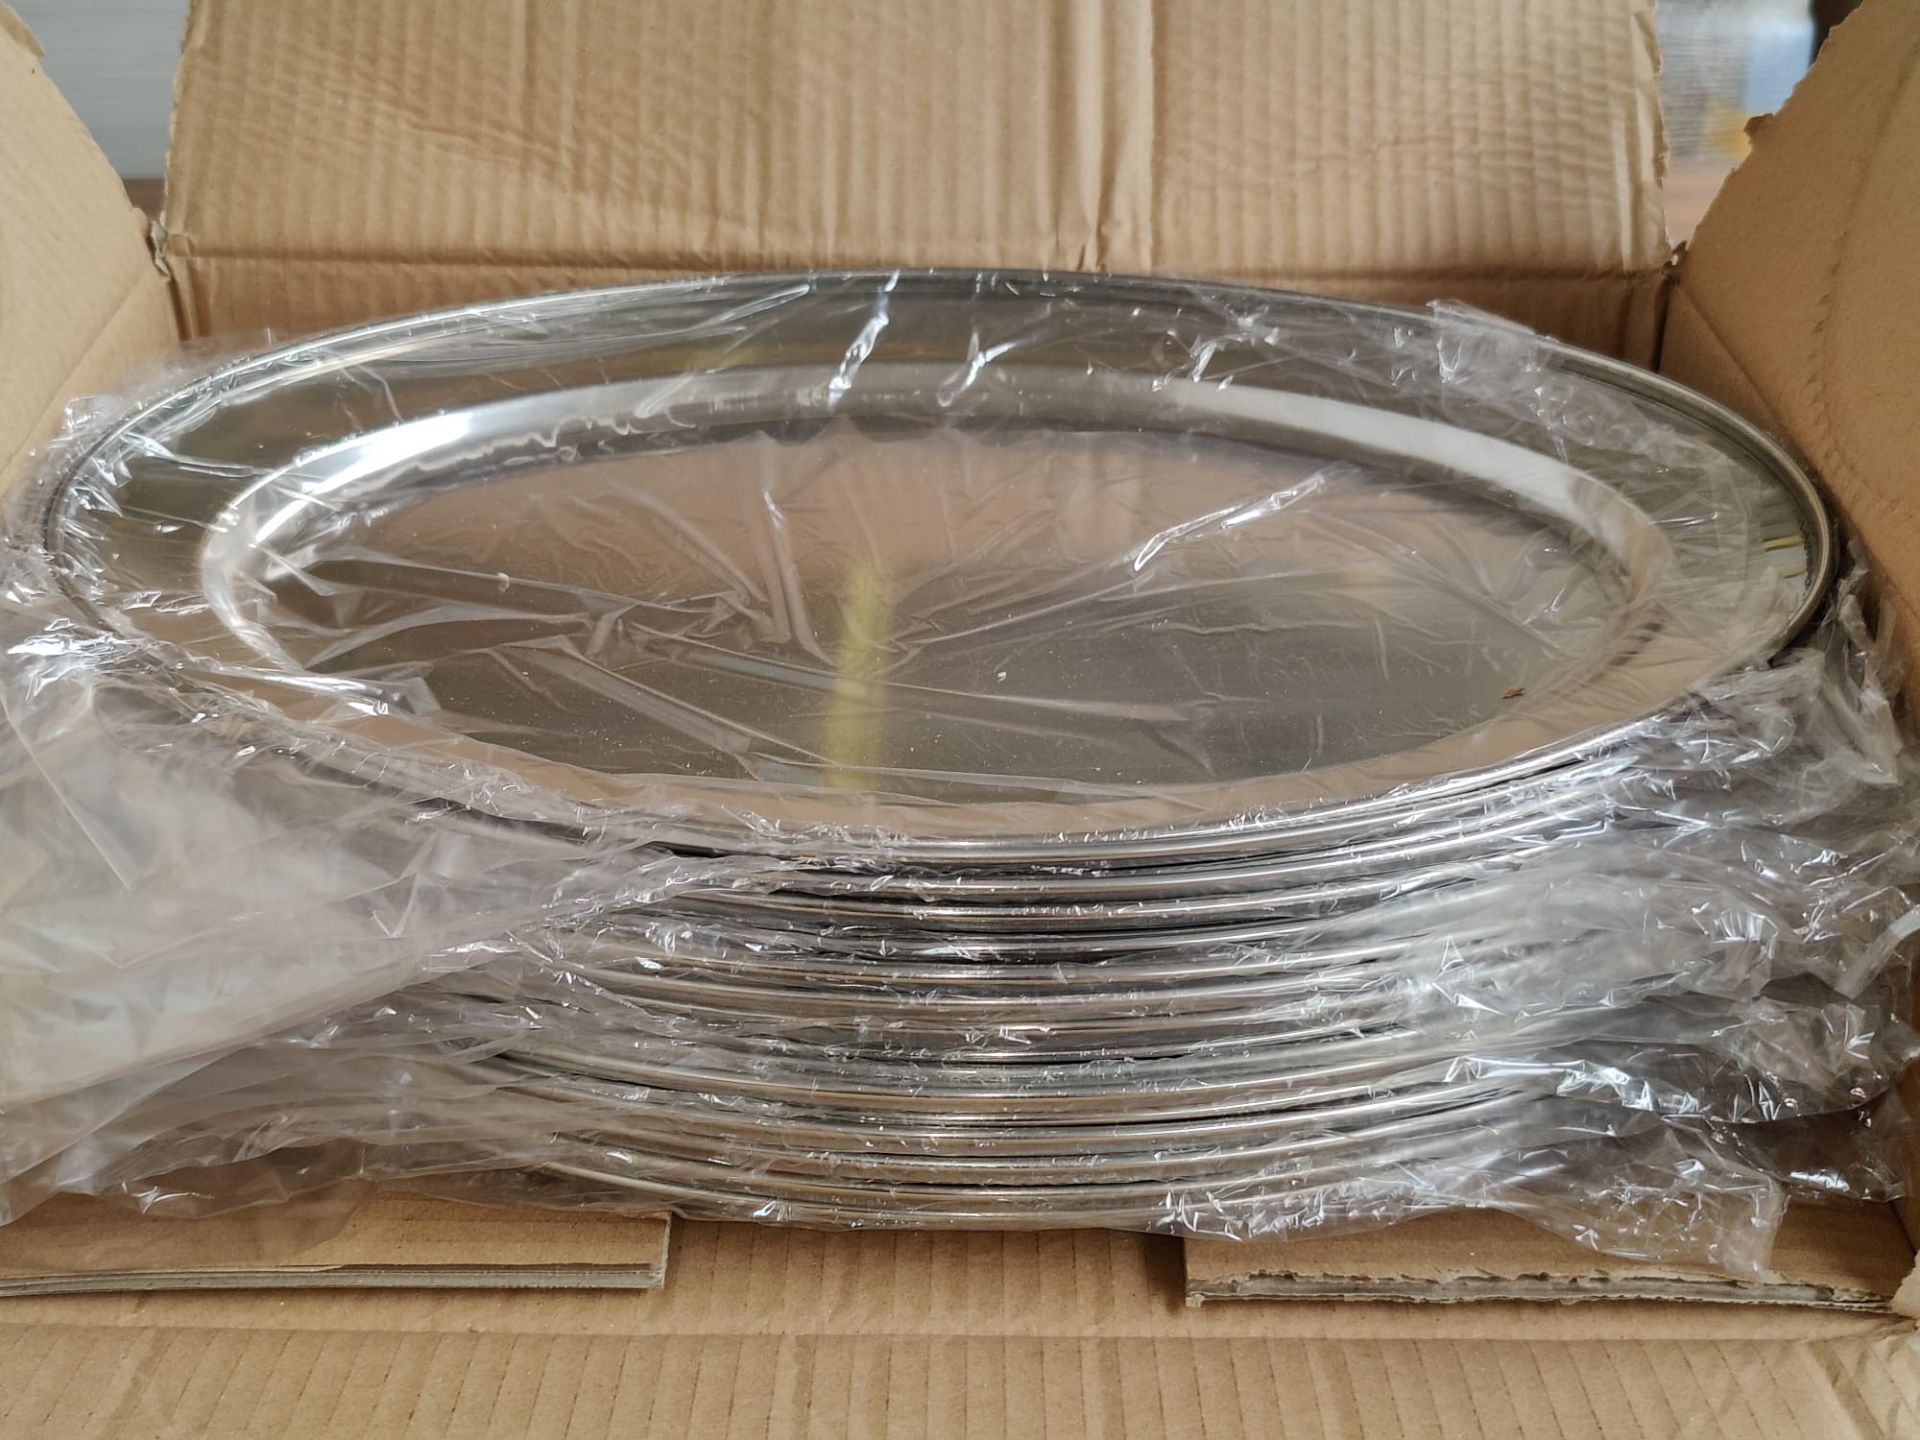 20 x Stainless Steel Oval Service Trays - Size: 450mm x 310mm - Brand New Boxed Stock - RRP £200 - Image 6 of 8